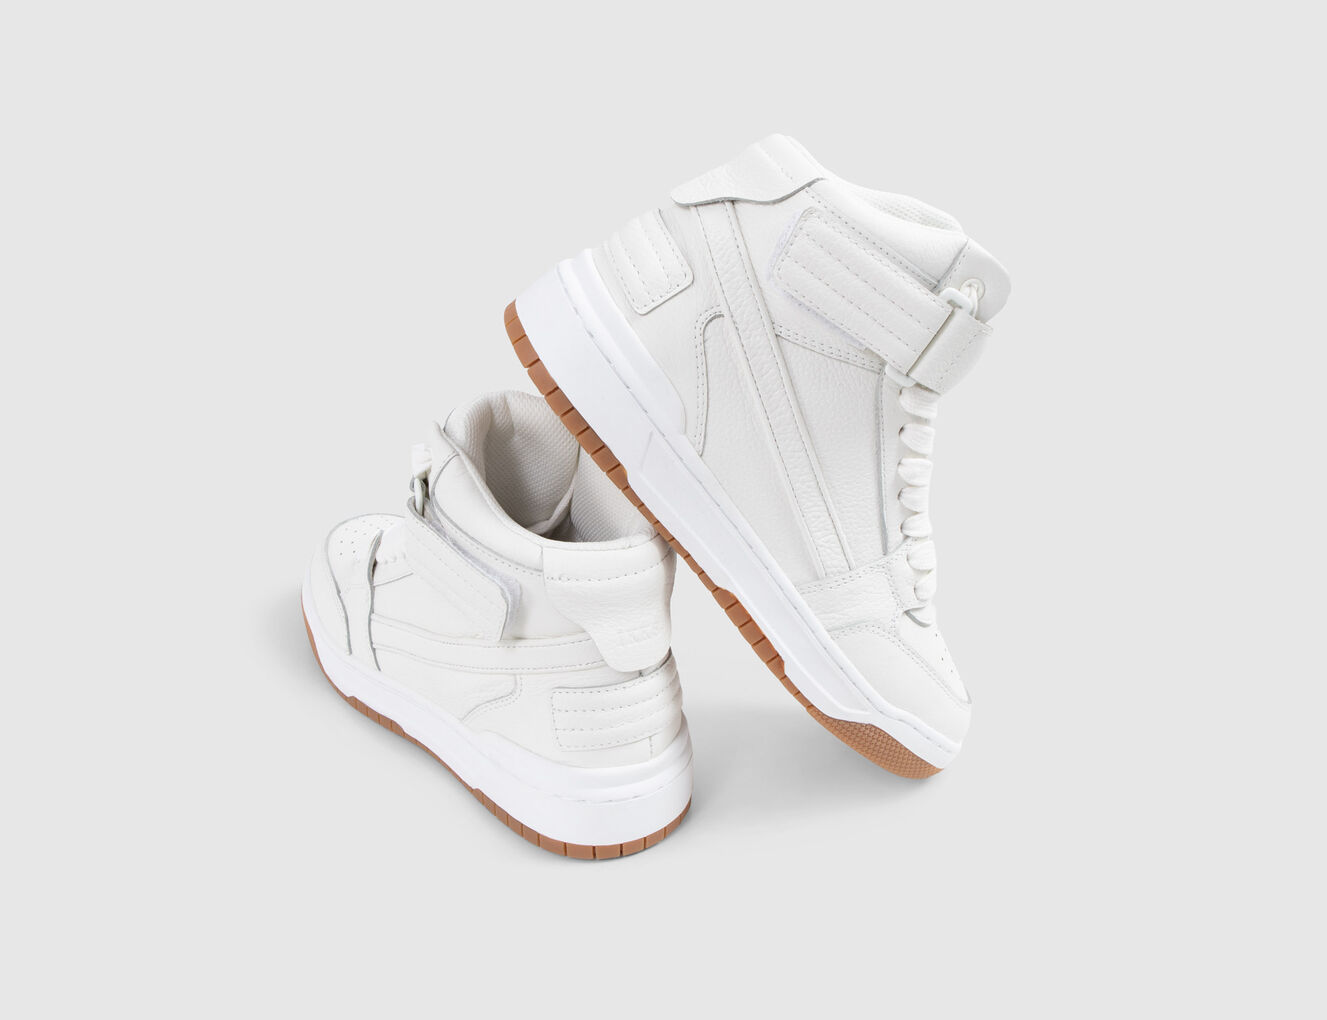 Unisex white leather Gender Free trainers - IKKS-6